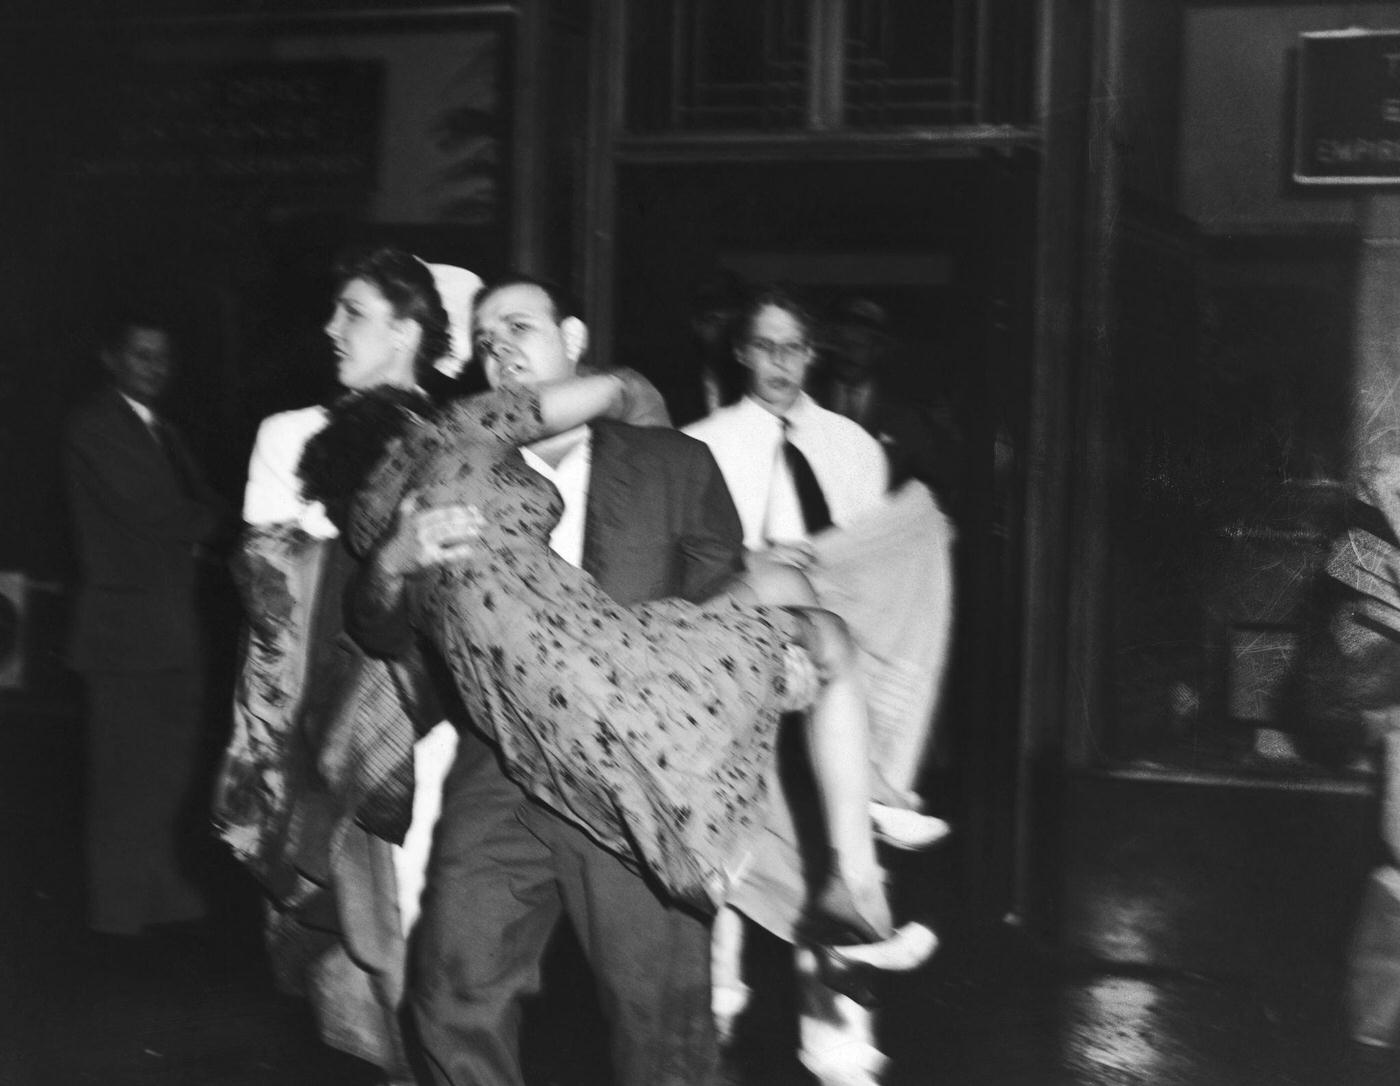 An injured woman is carried out of the Empire State Building to an ambulace on 34th Street, 1945